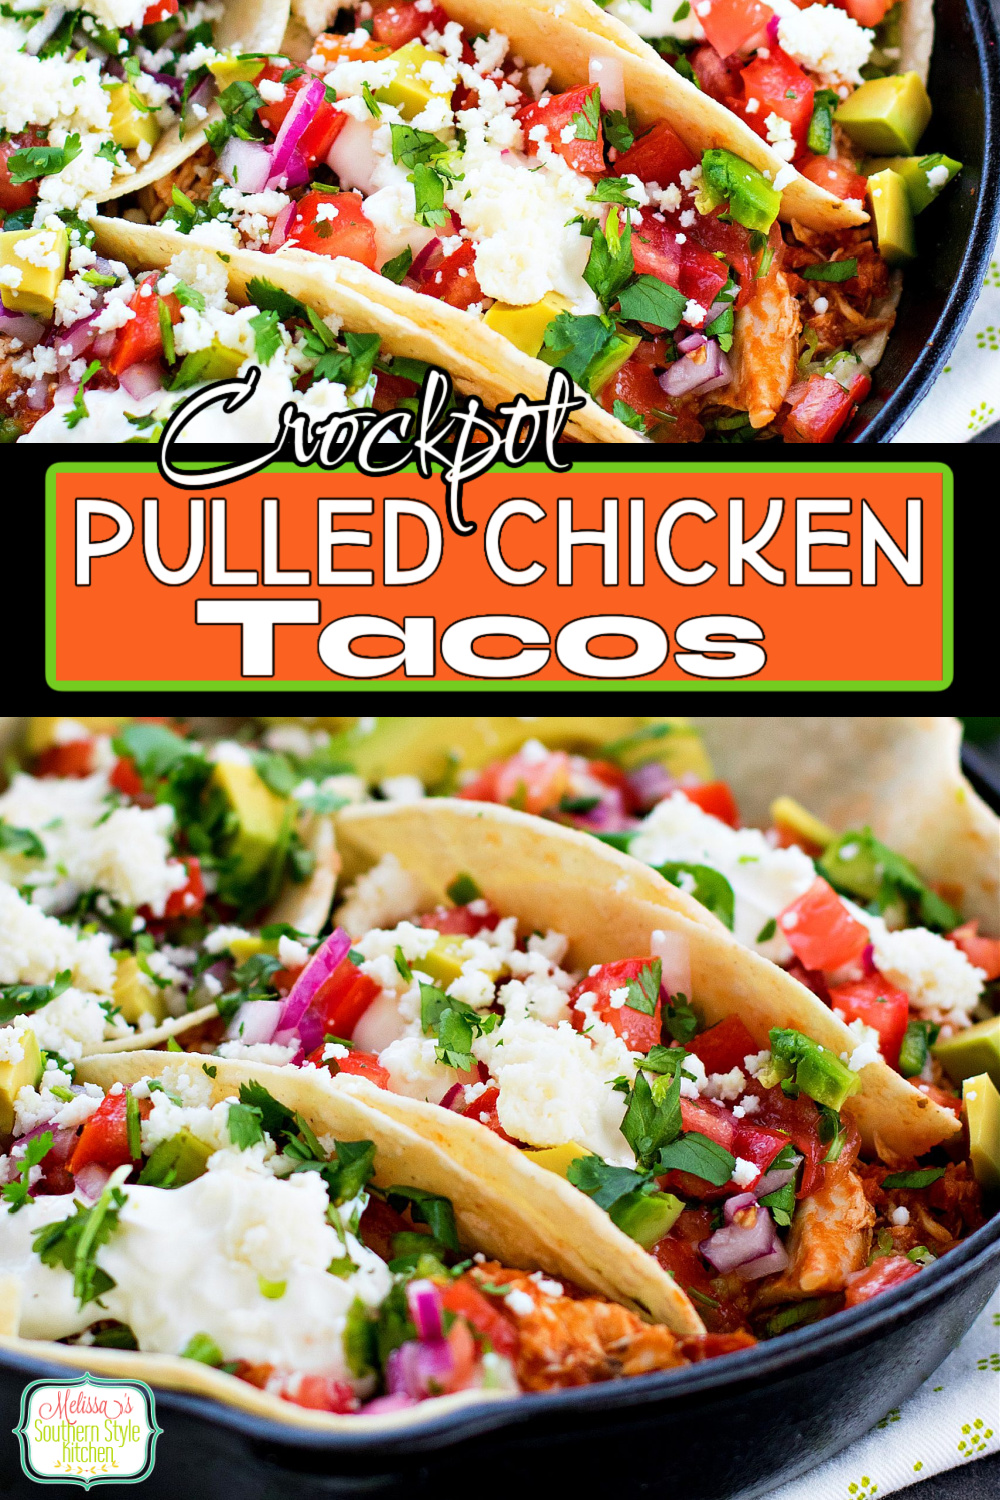 Simmered in a slow cooker these Crockpot Pulled Chicken Tacos will create a homestyle fiesta any night of the week #chickentacos #crockpotchicken #tacos #easychickenbreastrecipes #chicken #slowcookerchicken #crockpotrecipes #TacoTuesday #dinnerideas #dinner #southernfood #southernrecipes #mexicanfood via @melissasssk